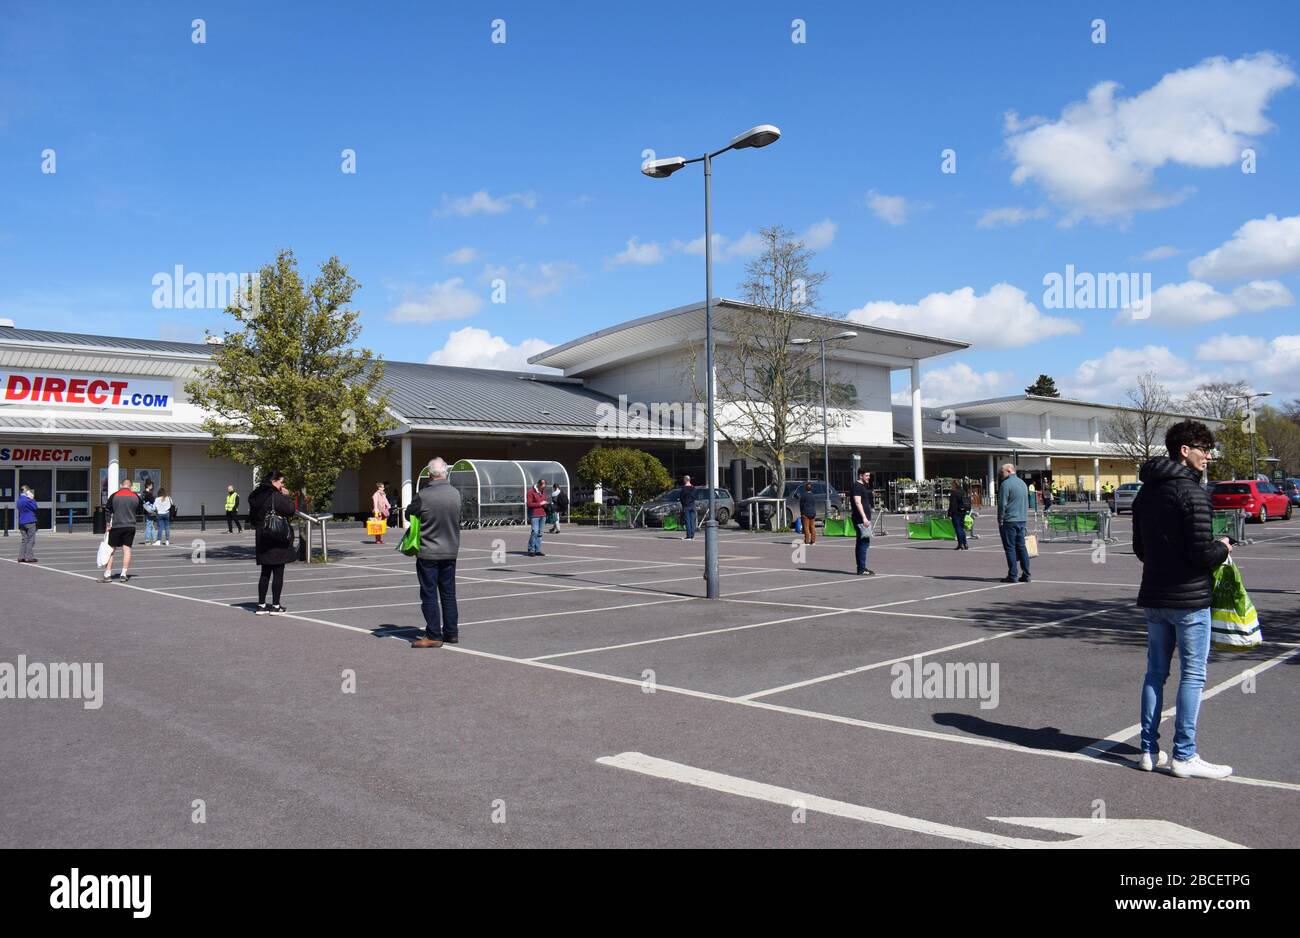 People queuing 2 meters apart in a car park while waiting to enter a supermarket to buy groceries in the UK during the Coronavirus Covid19 pandemic Stock Photo